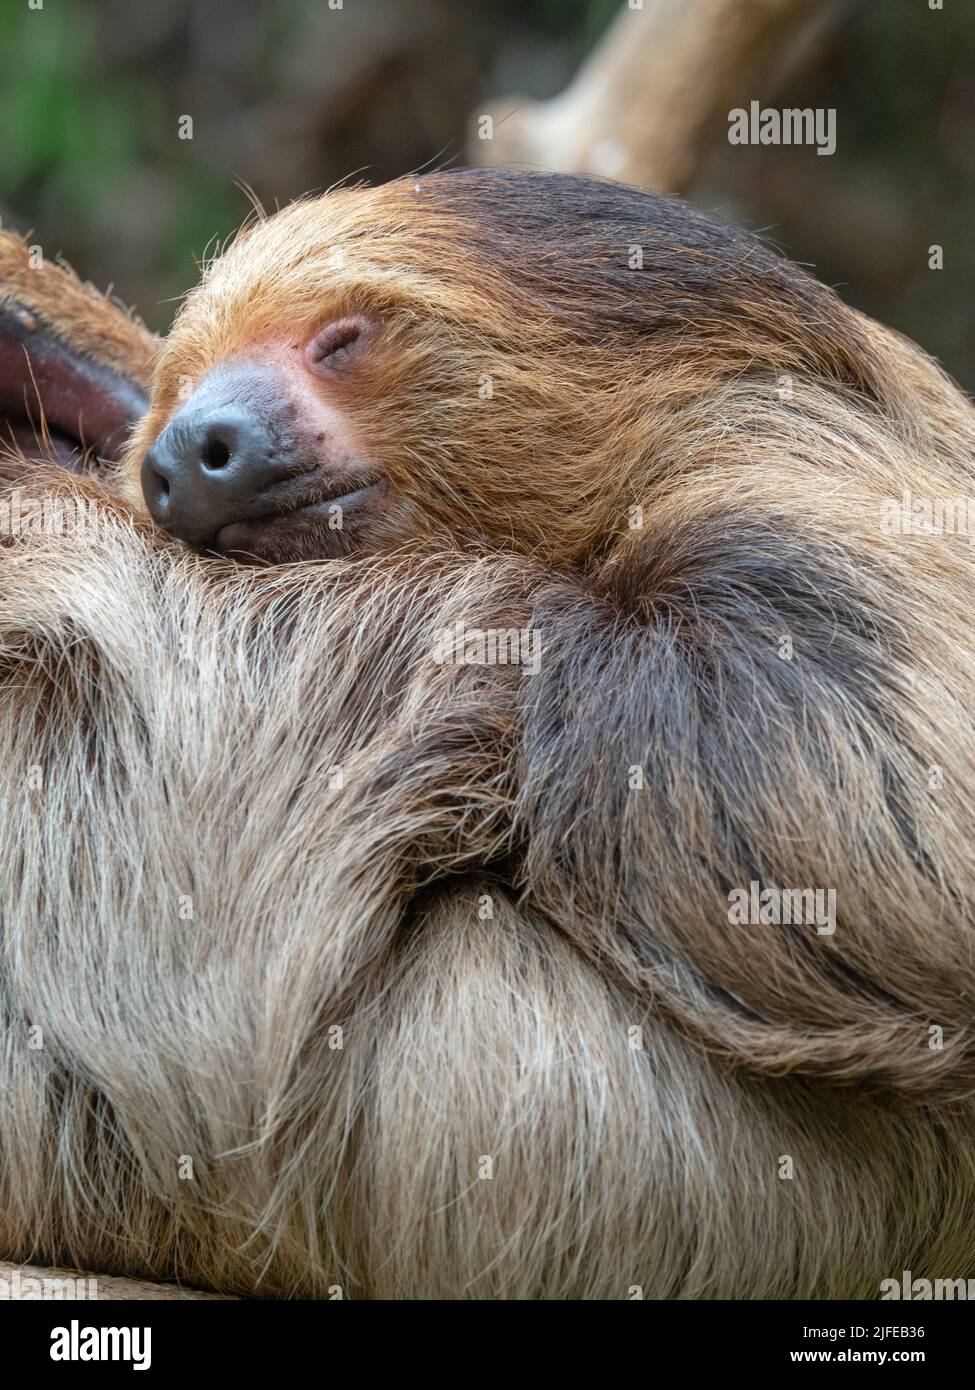 Linnaeus's two-toed sloth Choloepus didactylus also known as the southern two-toed sloth Stock Photo